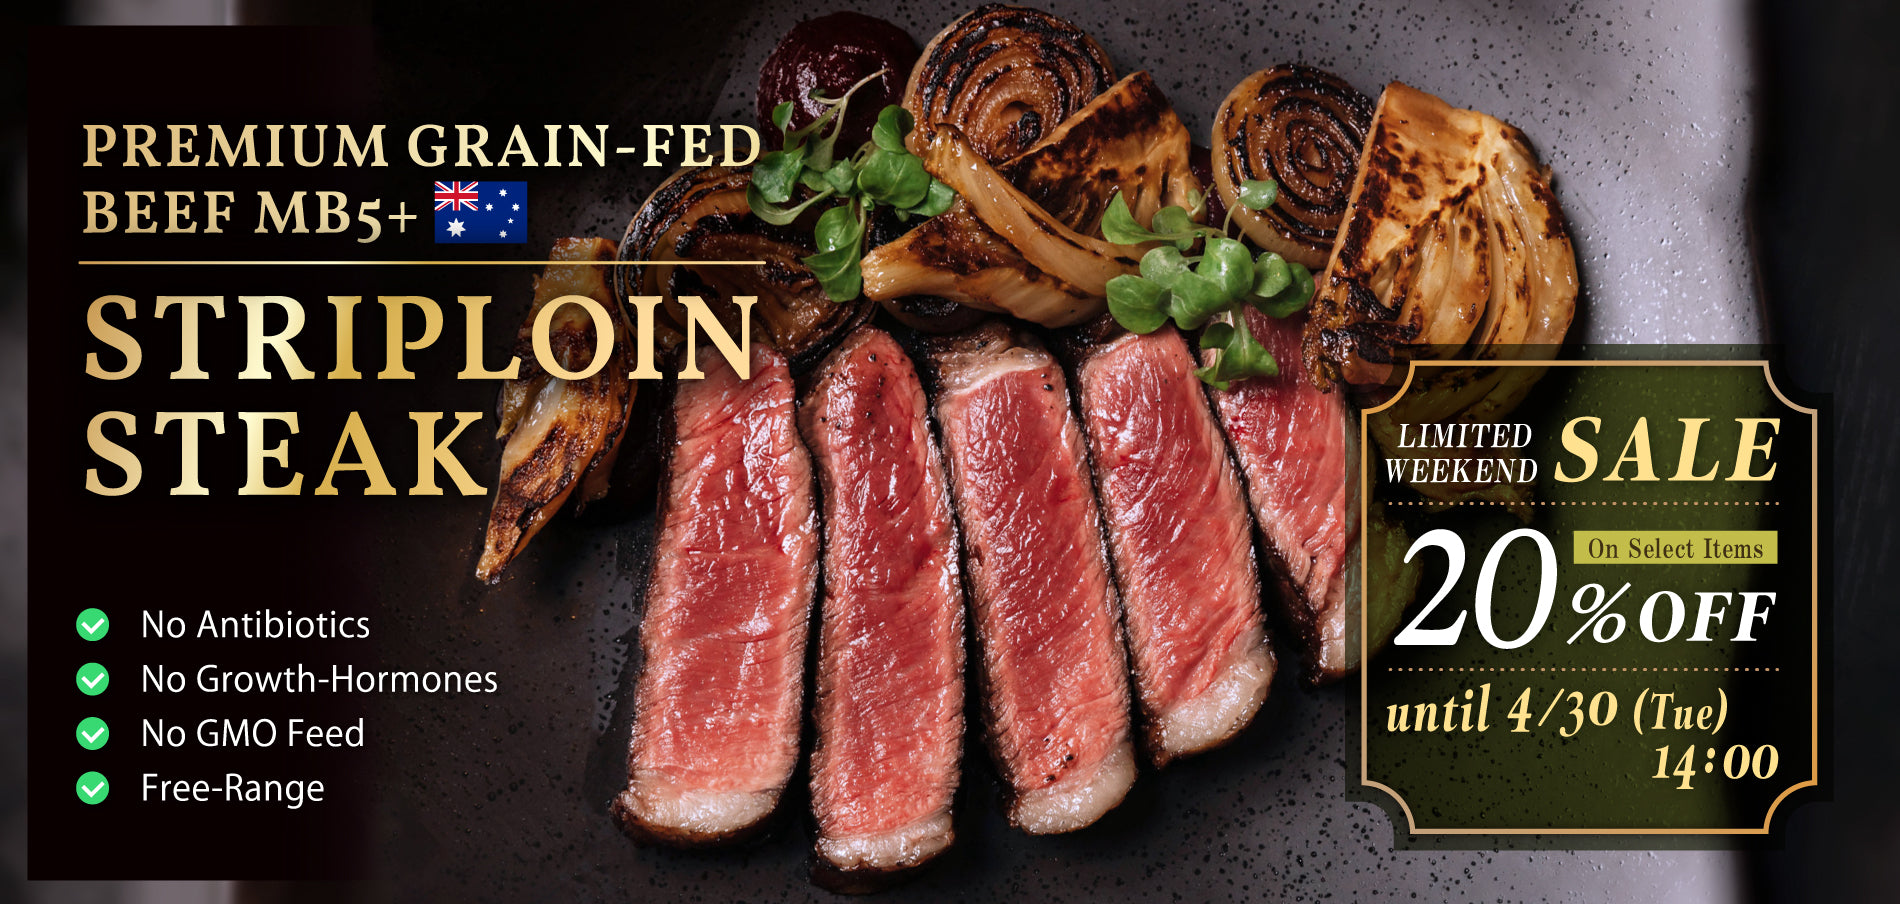 Limited Sale! 20% OFF on our Premium Grain-Fed Beef Striploin Steak.